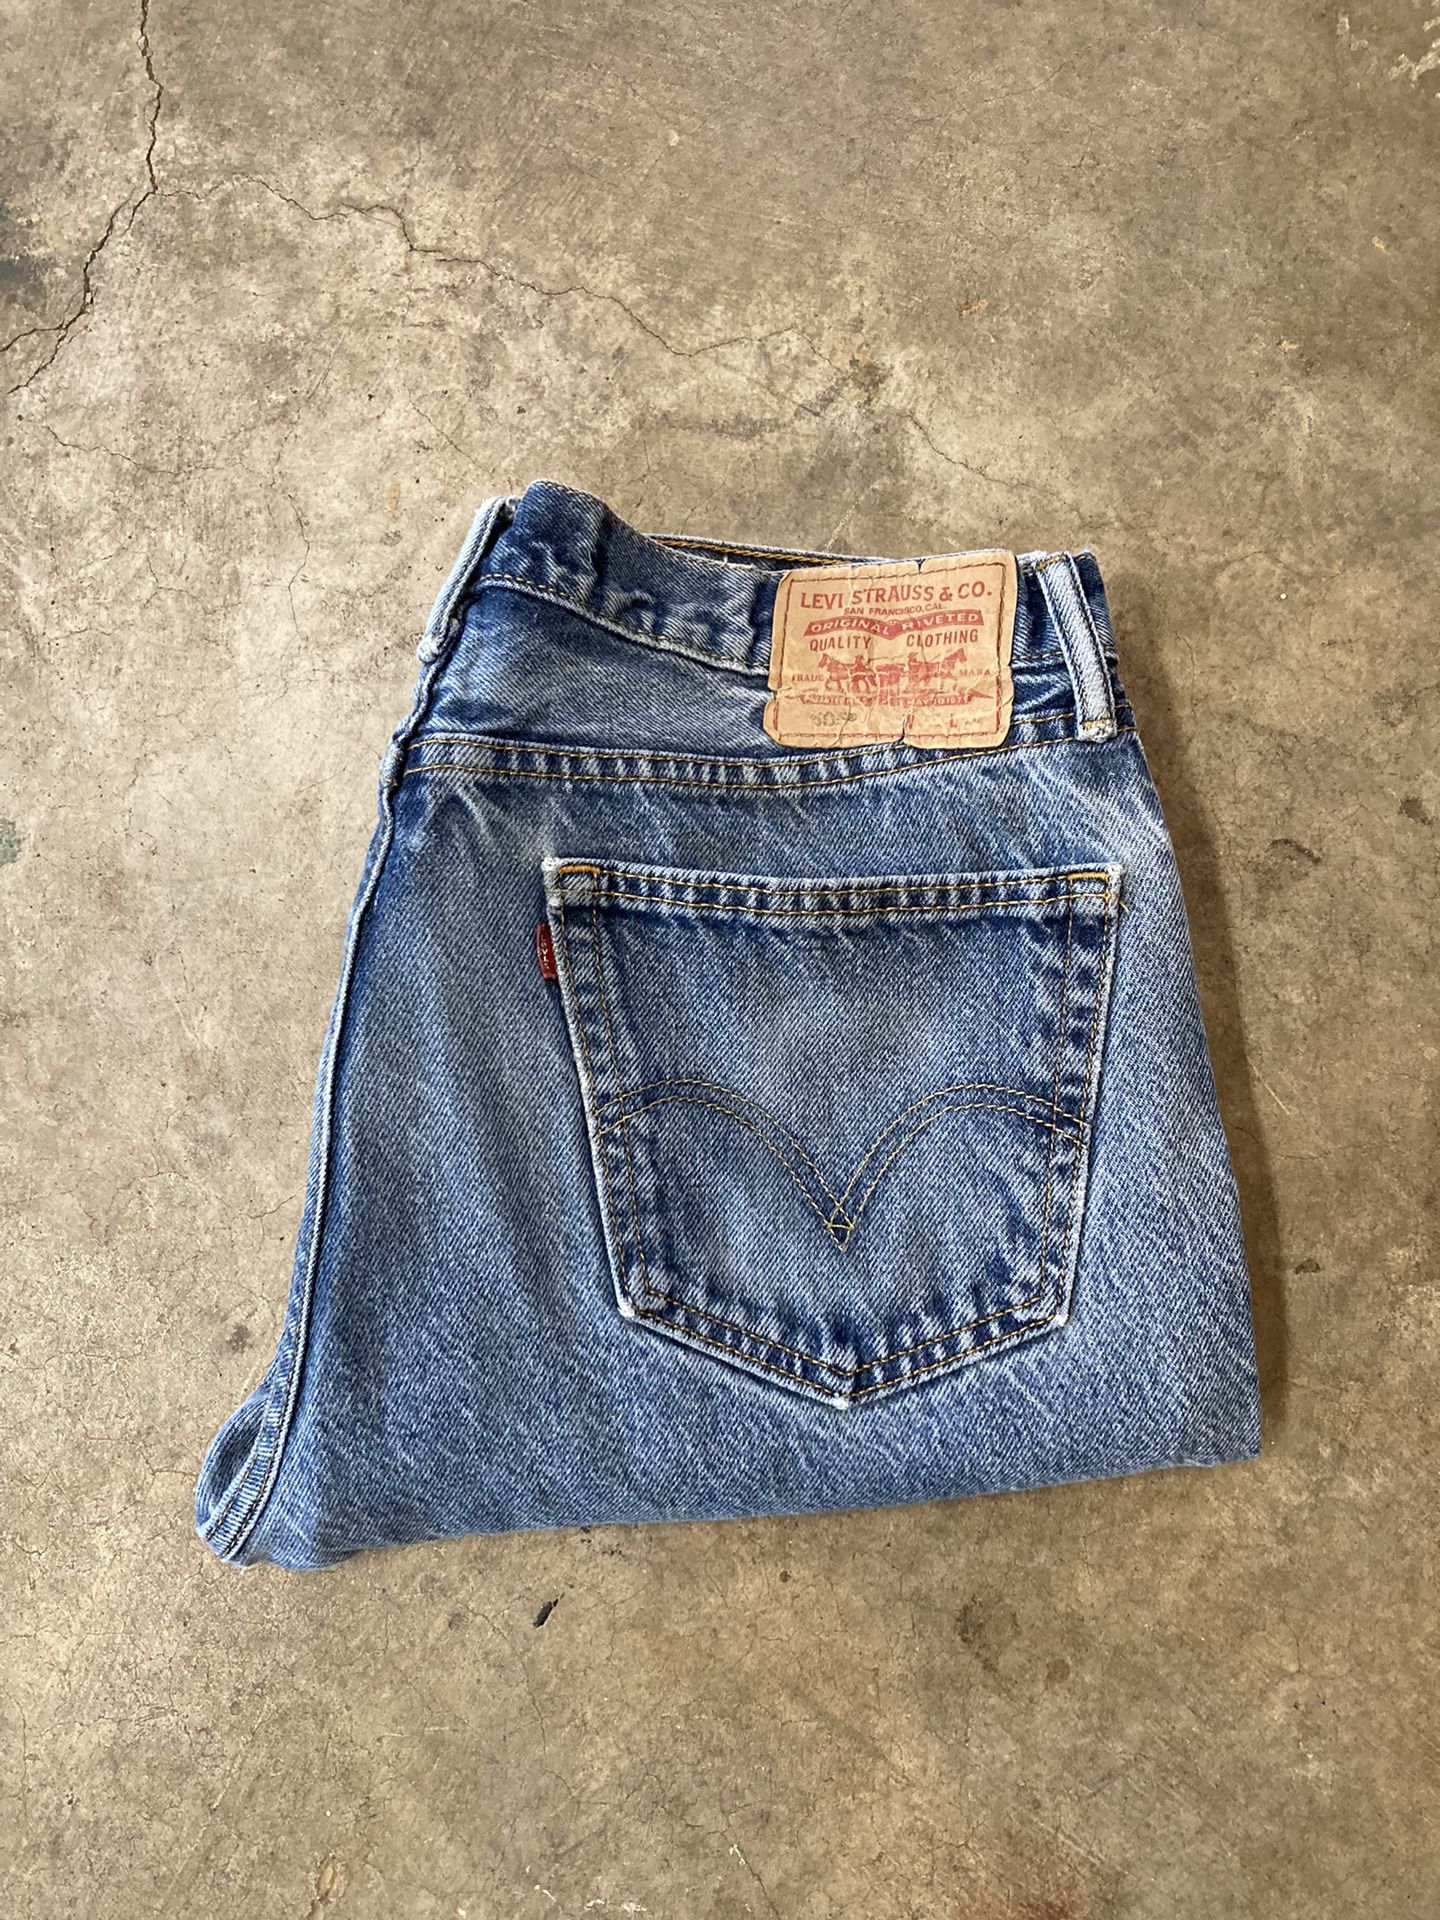 Y2K Levi's 505 Straight Fit Jeans Size 36x32